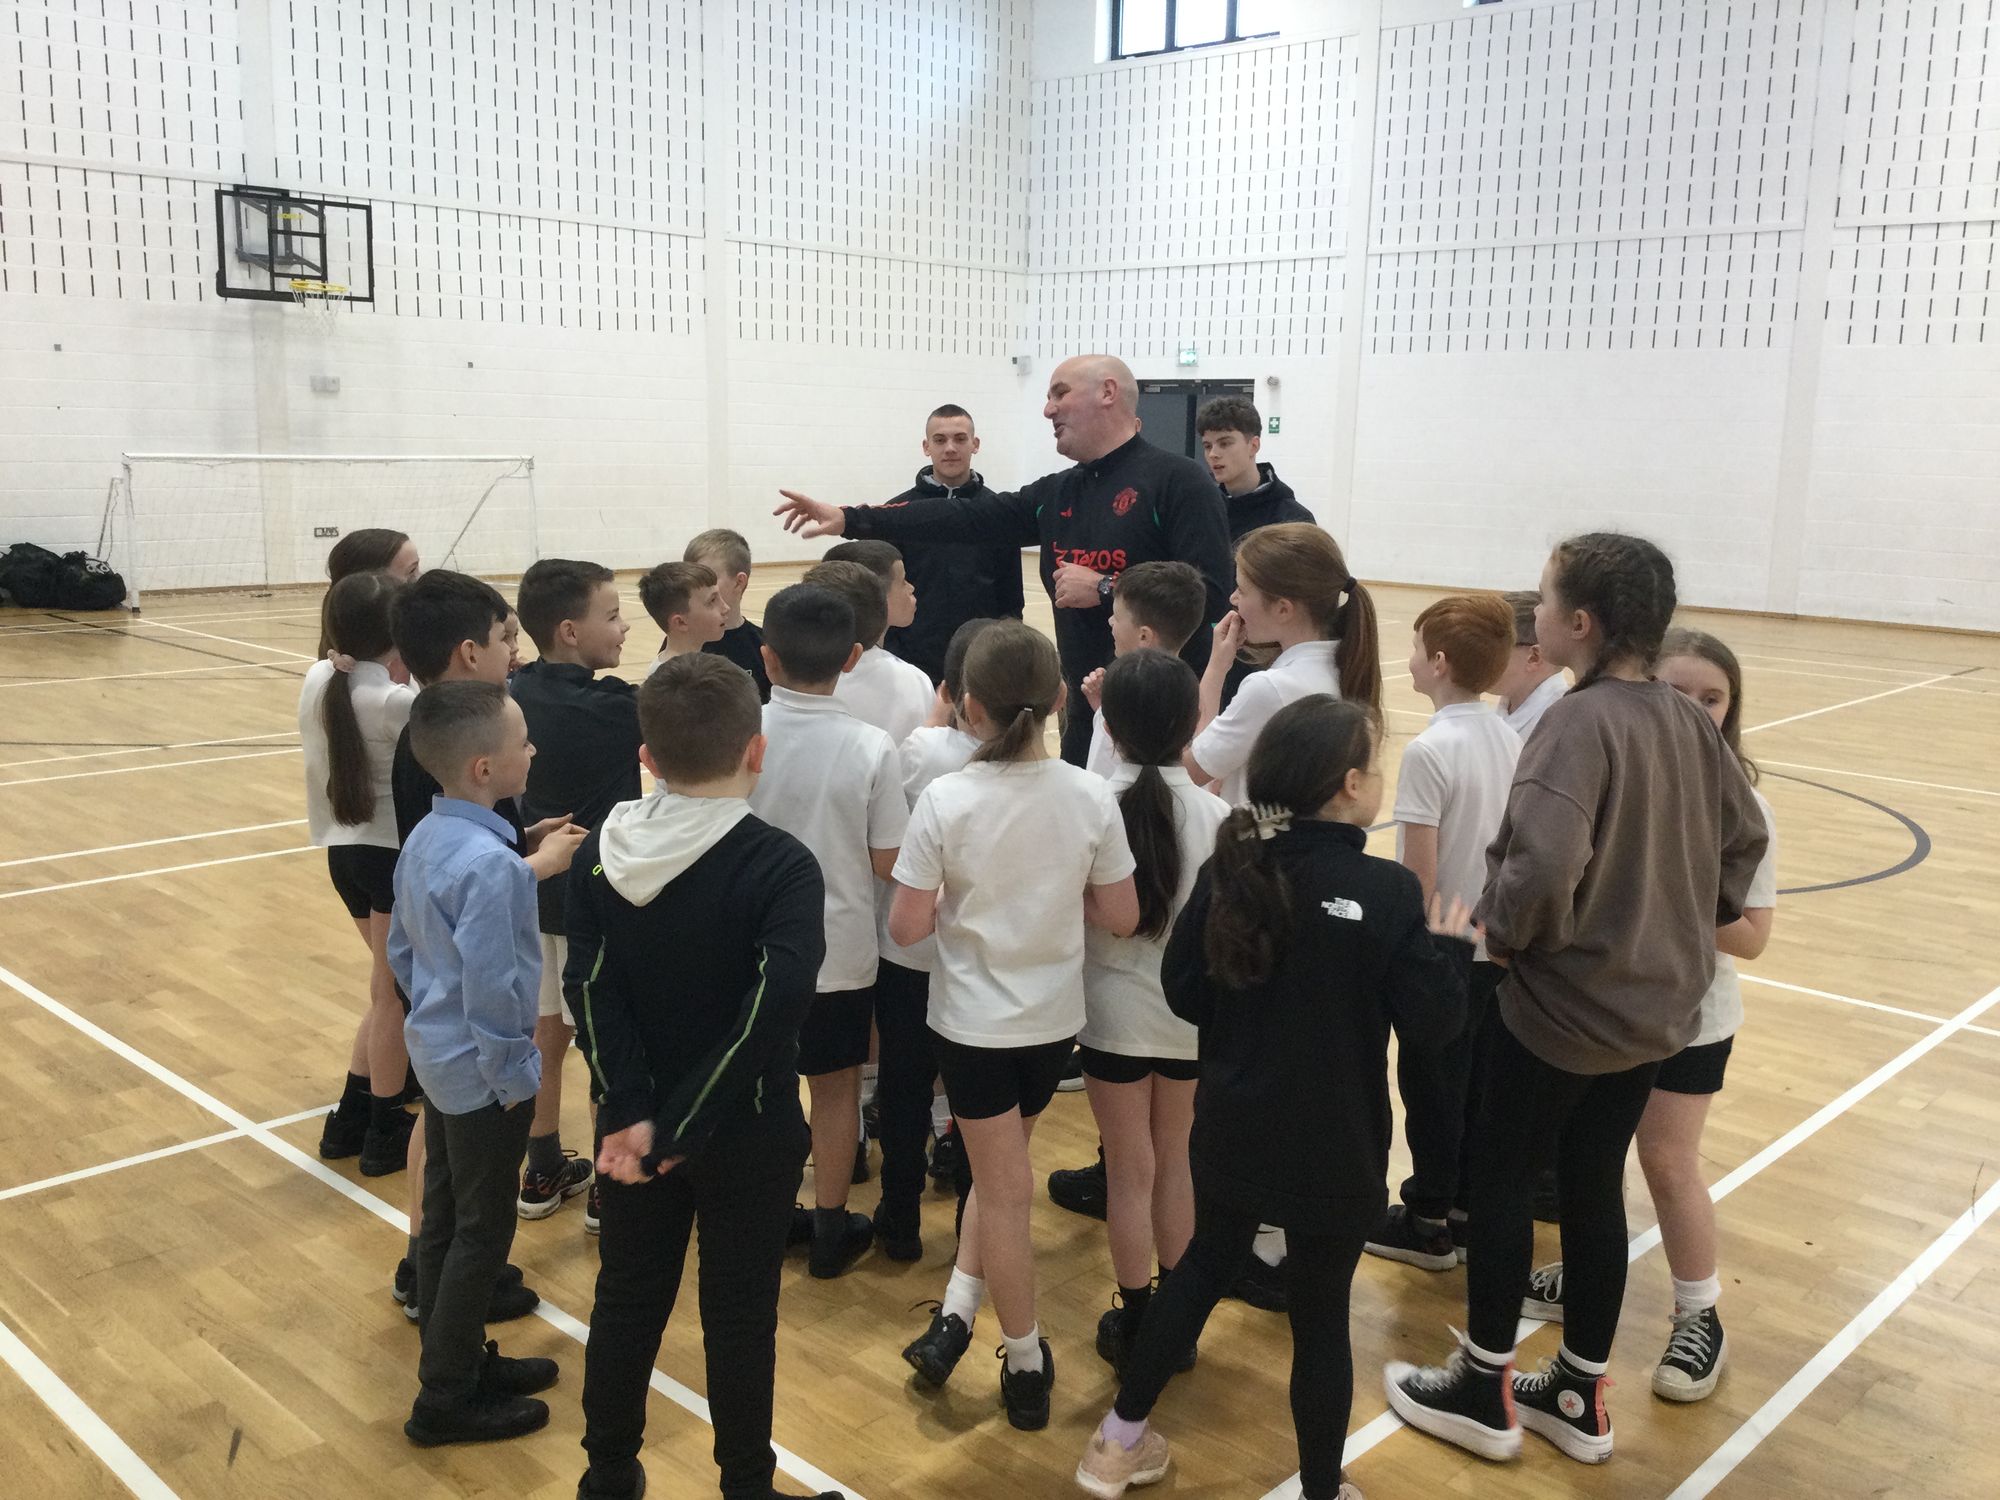 Year 5 pupils participate in PE sessions with the Manchester United Foundation.